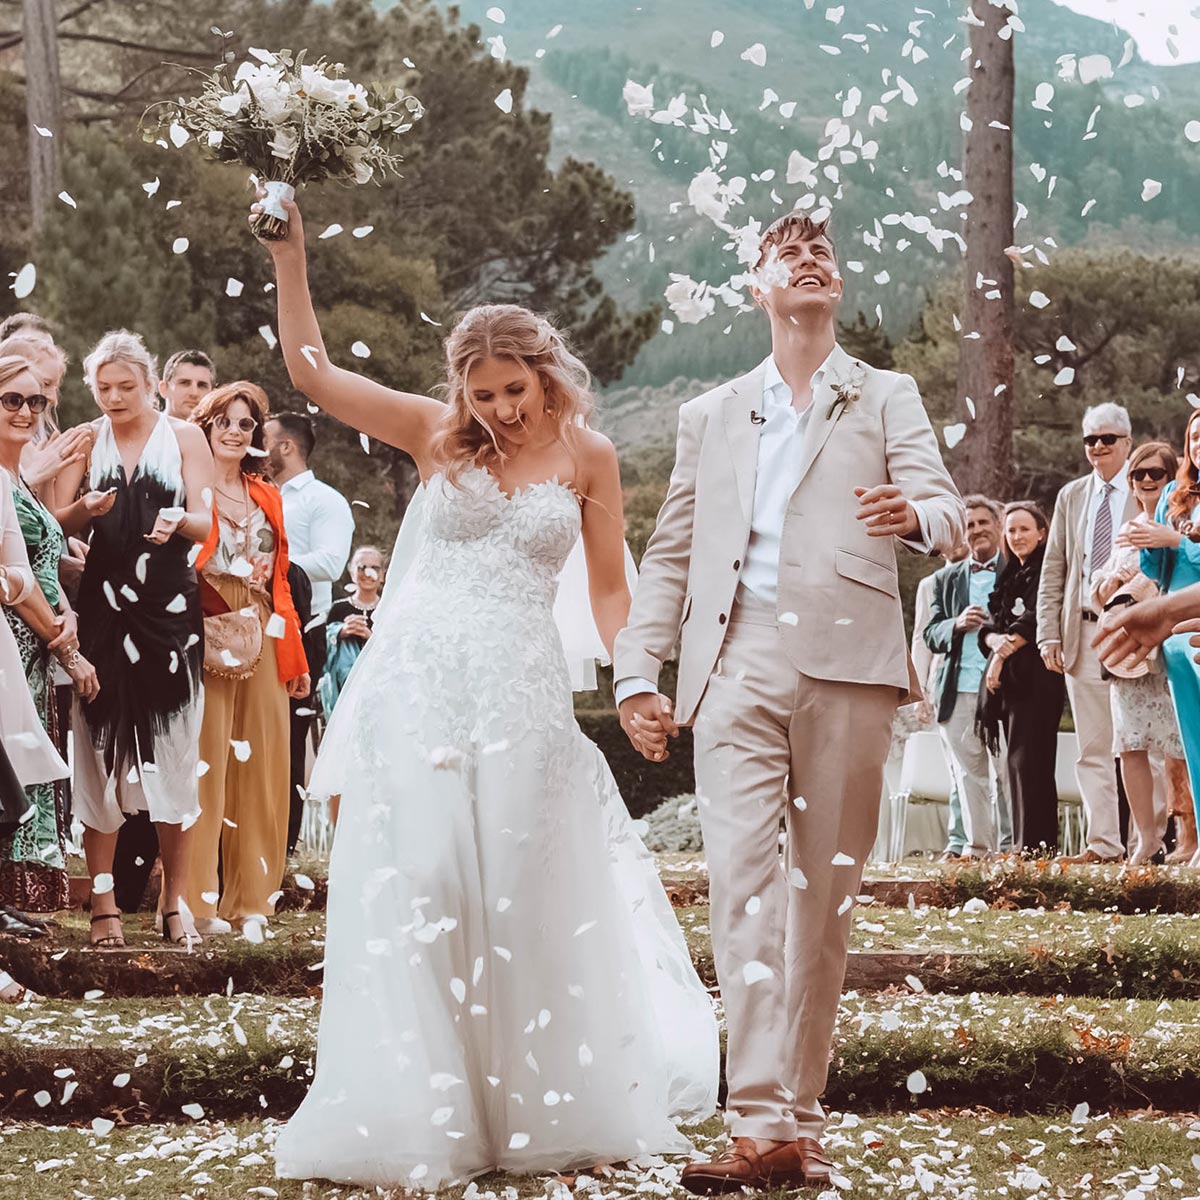 Bride Chloe and groom James walk down the aisle outdoors, smiling and holding hands, with guests showering them with flower petals. Weddings. Fabulous Flowers and Gifts.